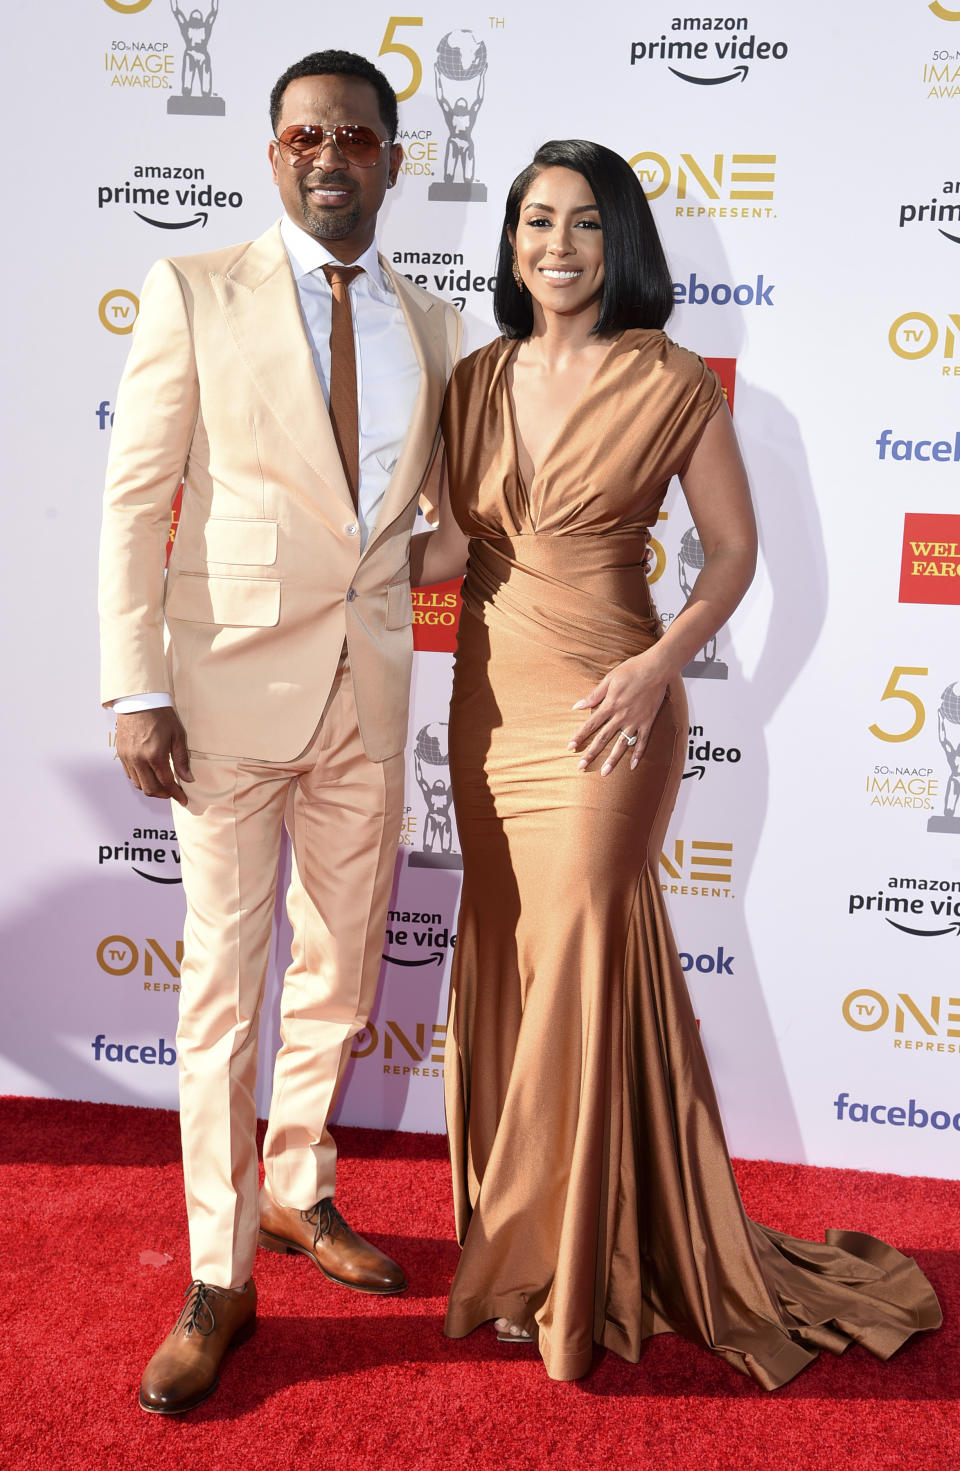 CORRECTS TO KYRA ROBINSON INSTEAD OF MECHELLE EPPS - Mike Epps, left, and Kyra Robinson arrive at the 50th annual NAACP Image Awards on Saturday, March 30, 2019, at the Dolby Theatre in Los Angeles. (Photo by Richard Shotwell/Invision/AP)